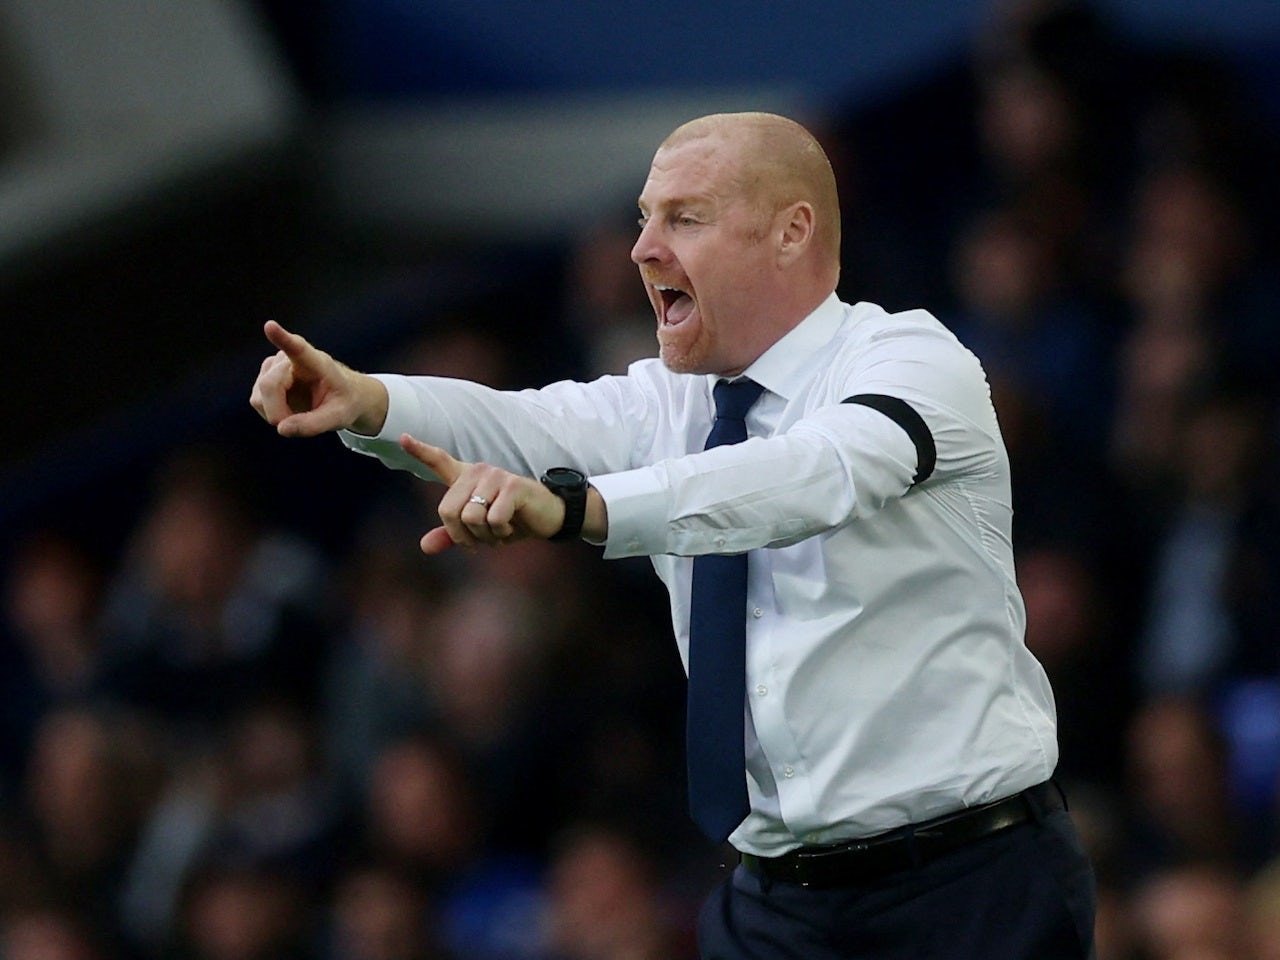 'Fifteen games ago I was deemed the Messiah' - Sean Dyche sends message to Everton fans